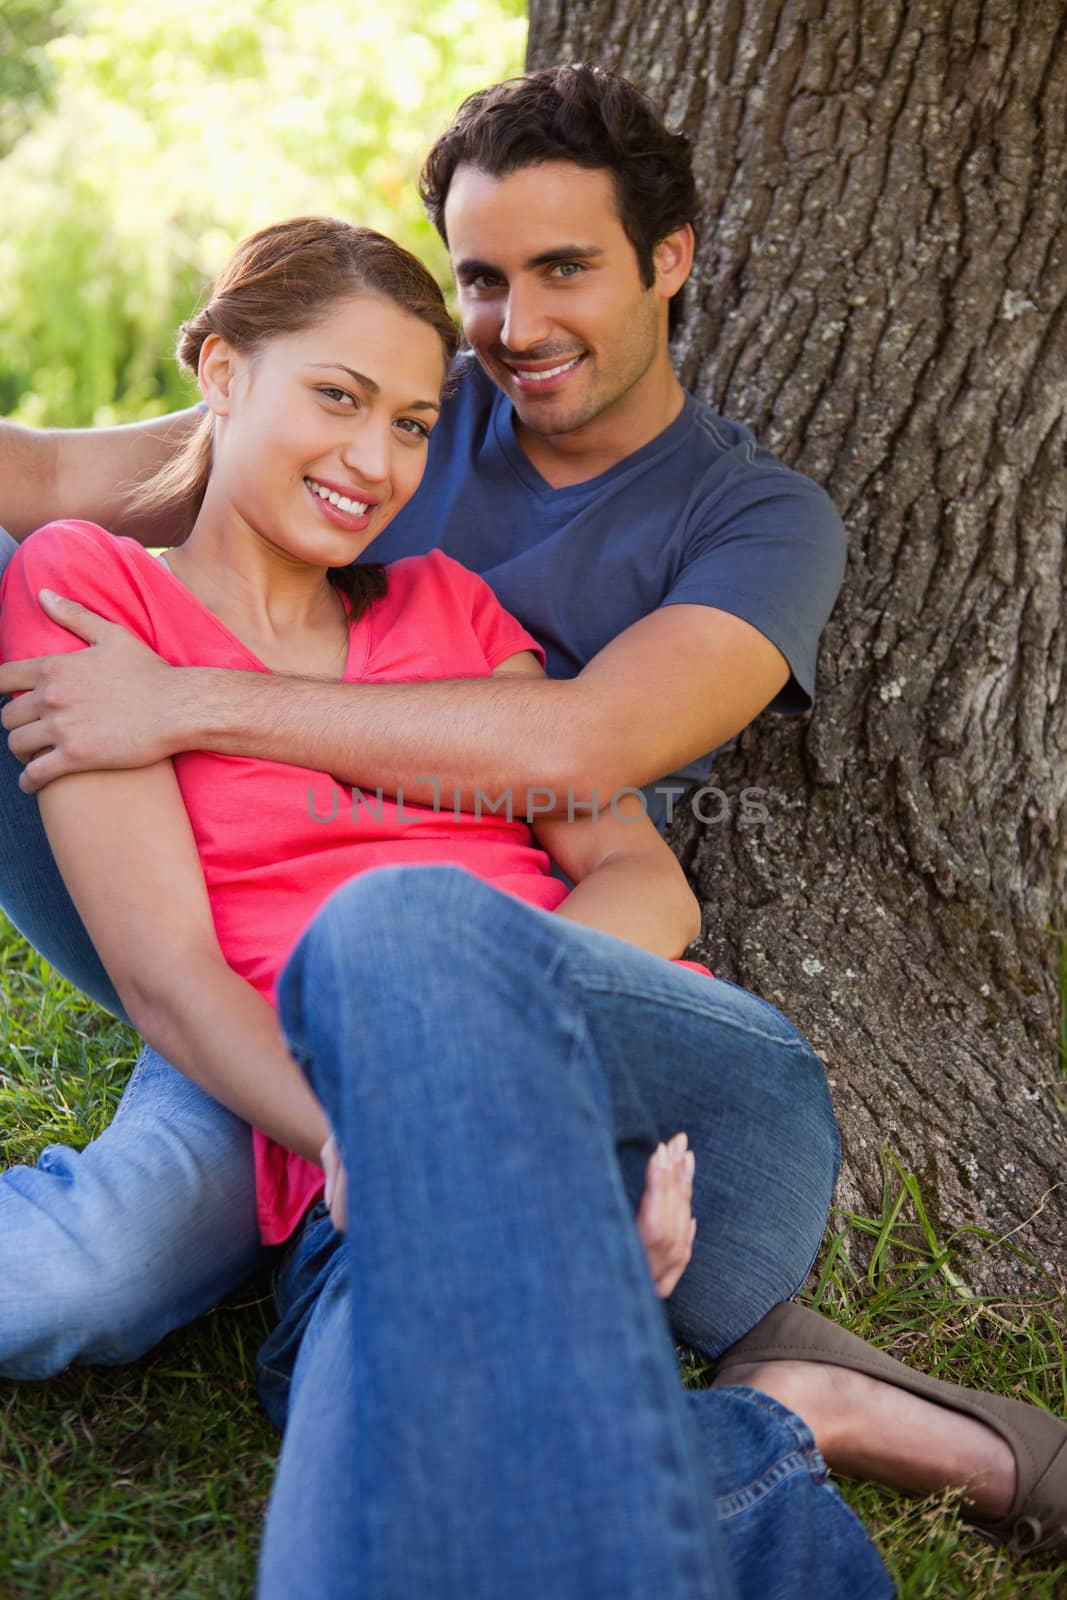 Man looking ahead as he holds her while they sit together in the by Wavebreakmedia